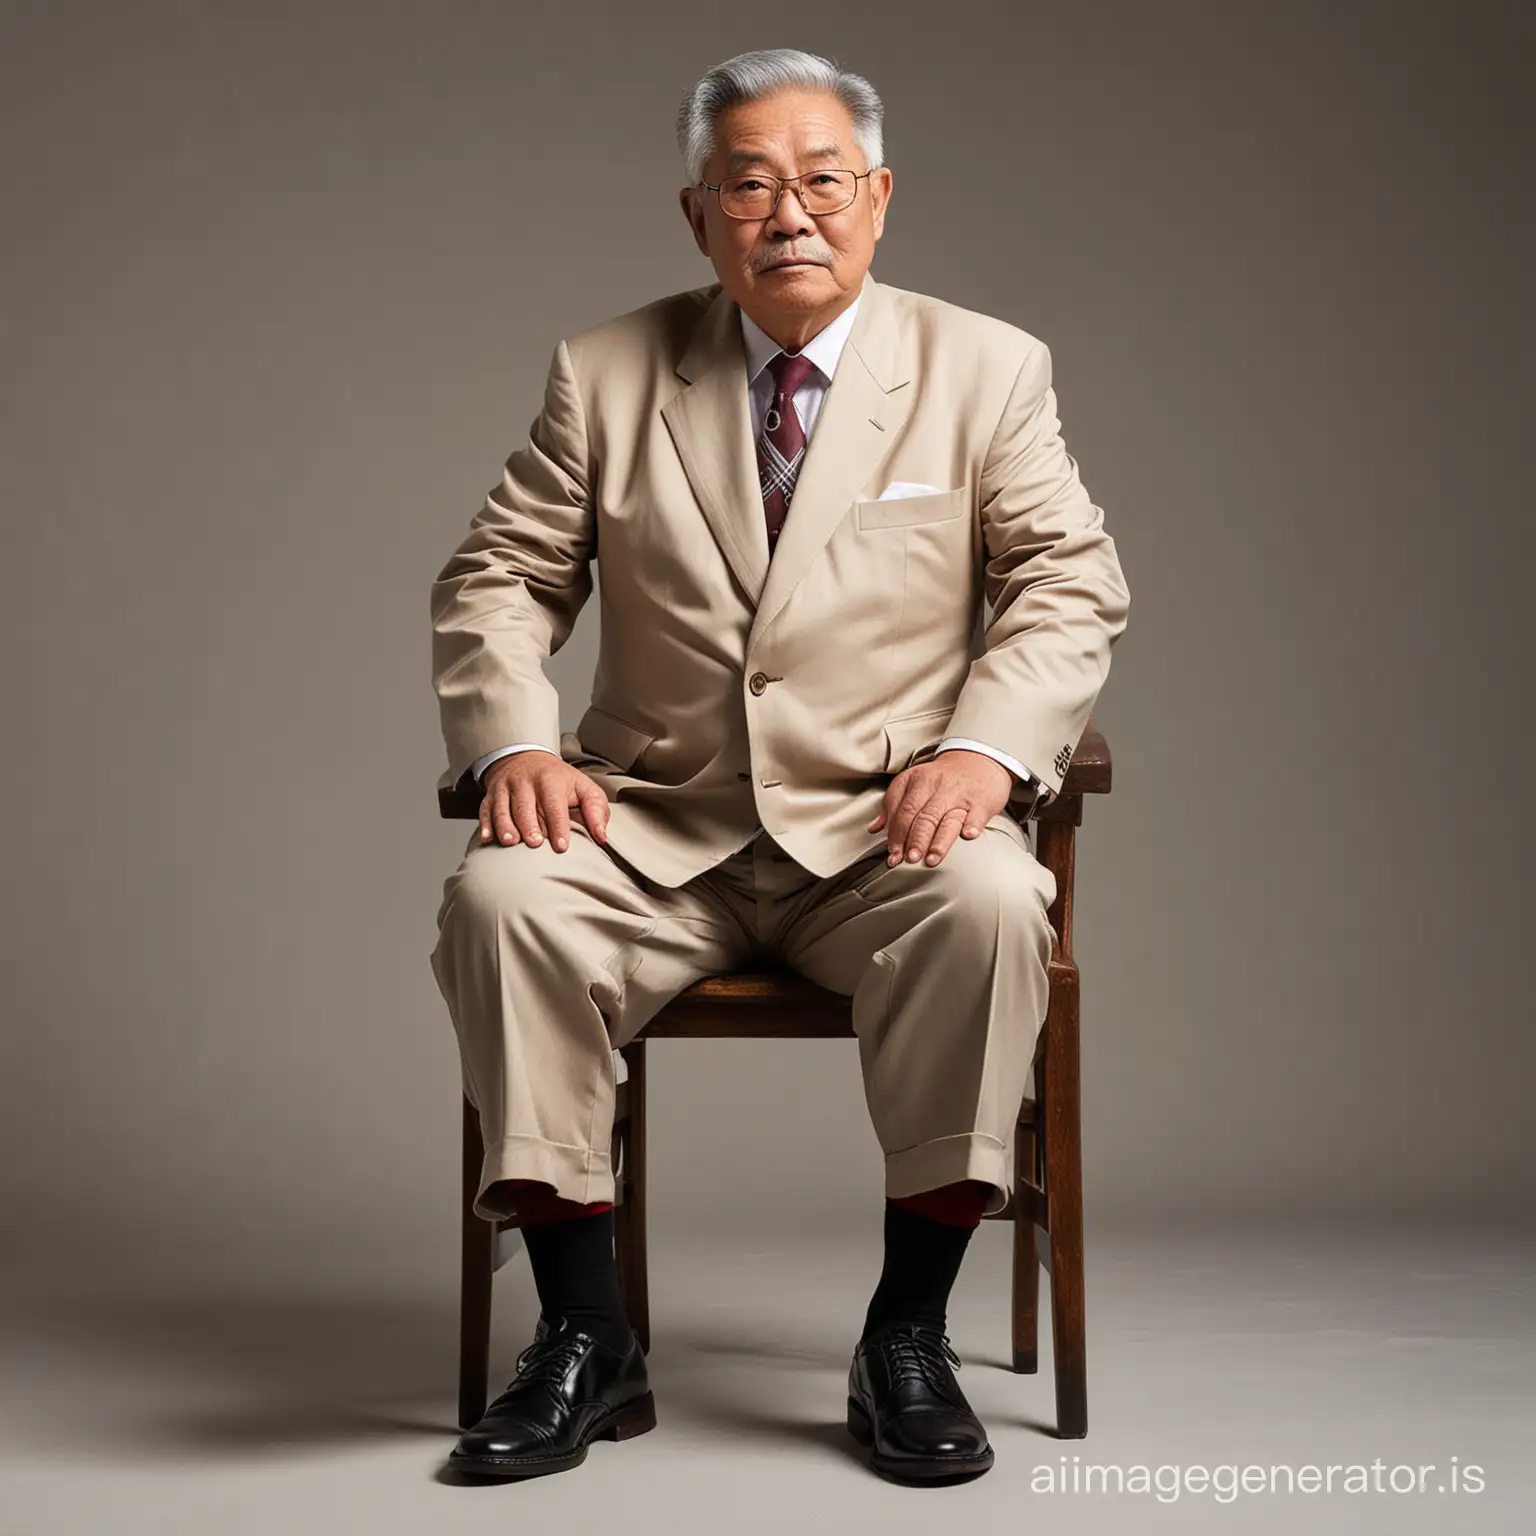 Elderly-Chinese-Gentleman-in-Tan-Suit-Seated-Dramatically-on-Cream-Background